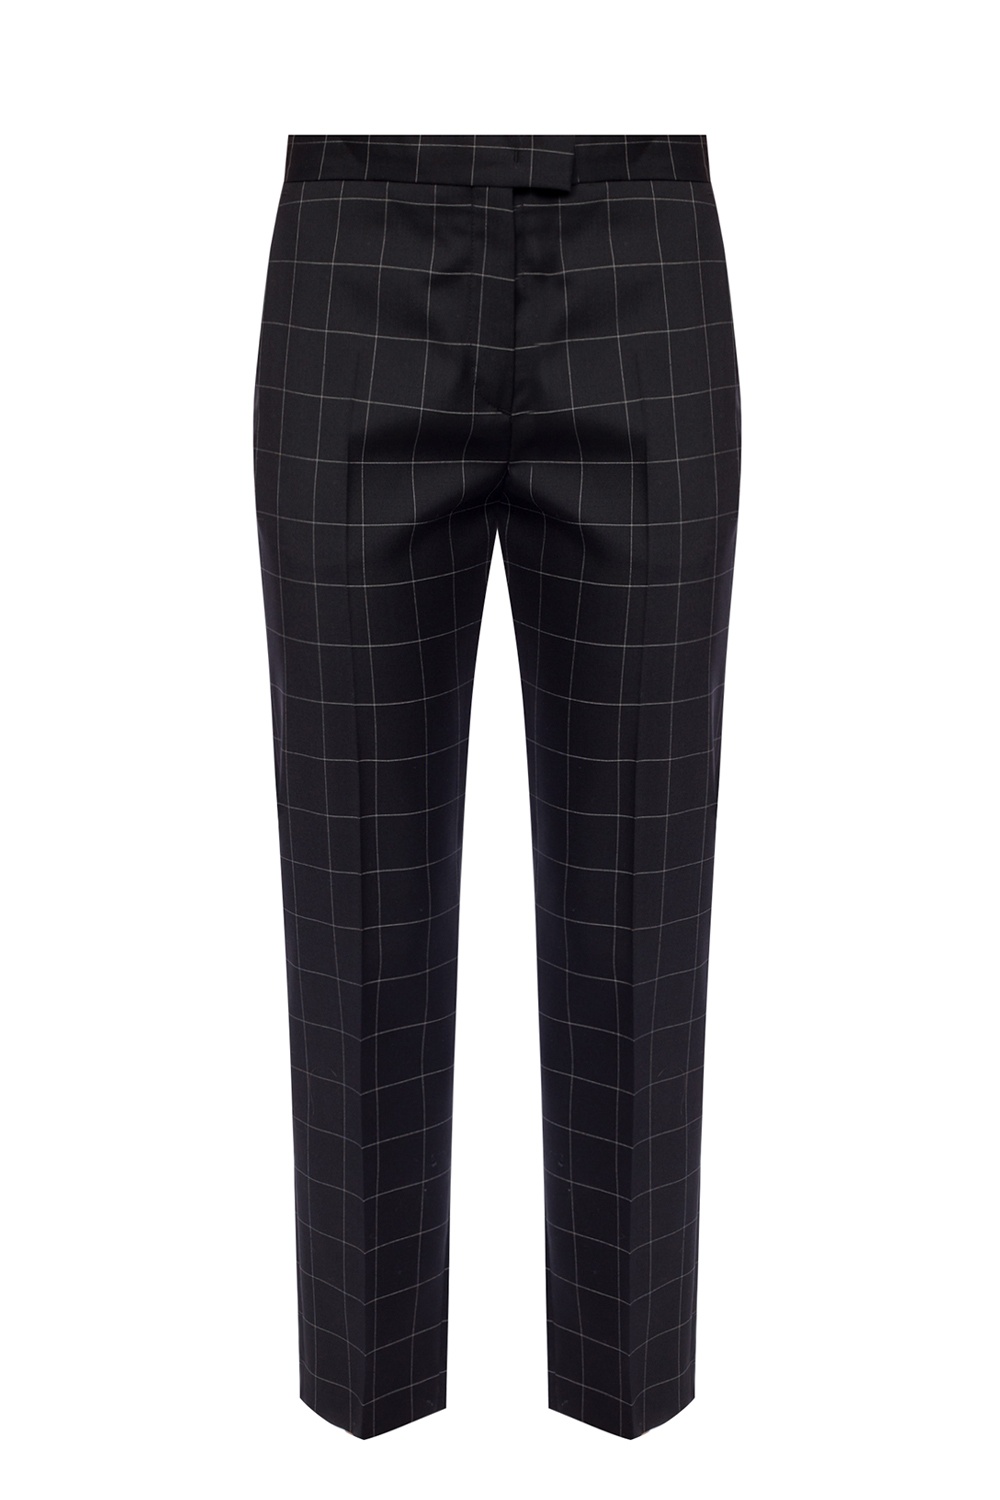 Black Checked trousers PS Paul Smith - Vitkac GB